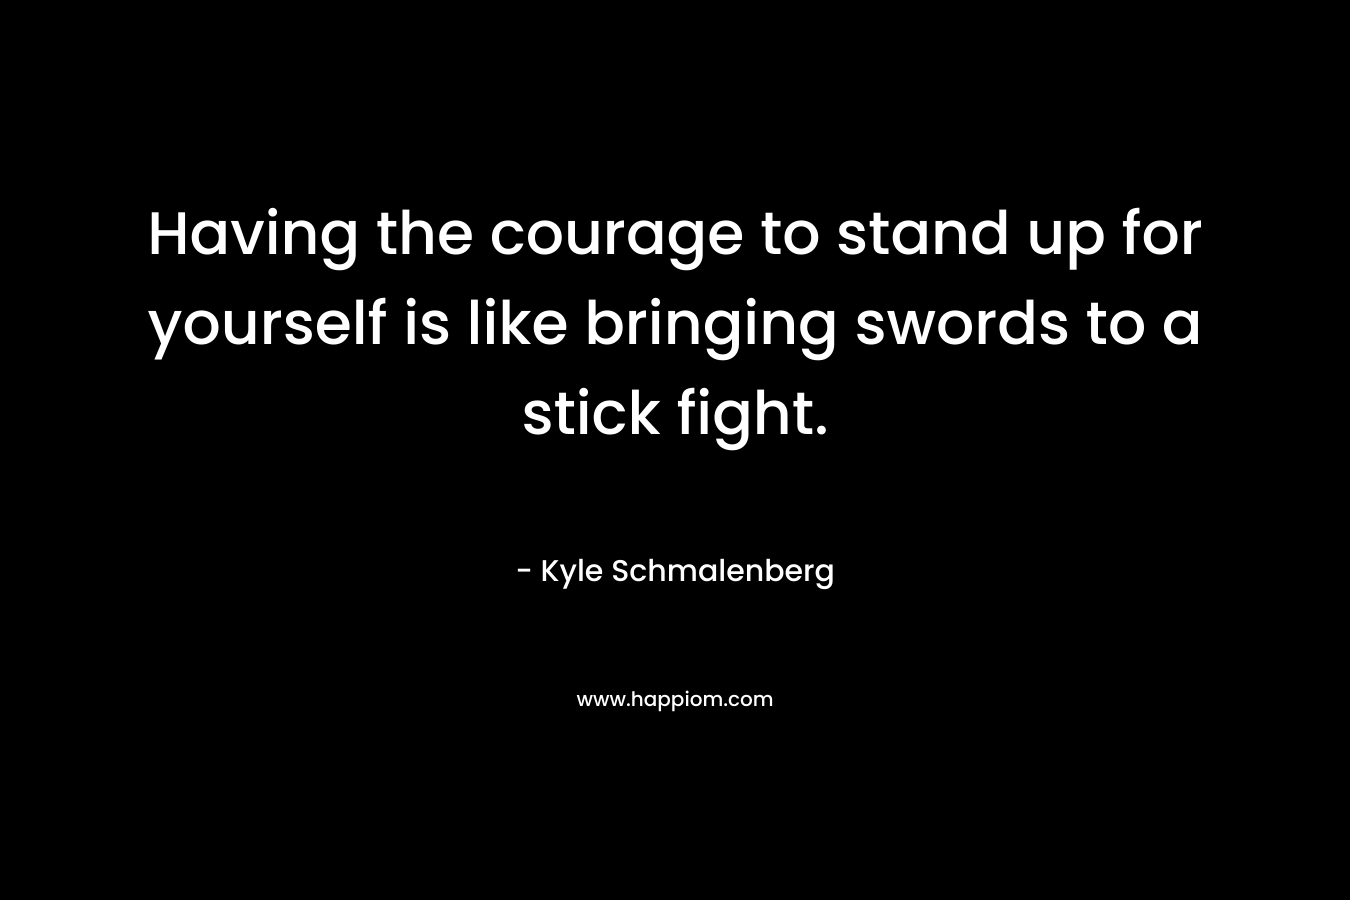 Having the courage to stand up for yourself is like bringing swords to a stick fight. – Kyle Schmalenberg